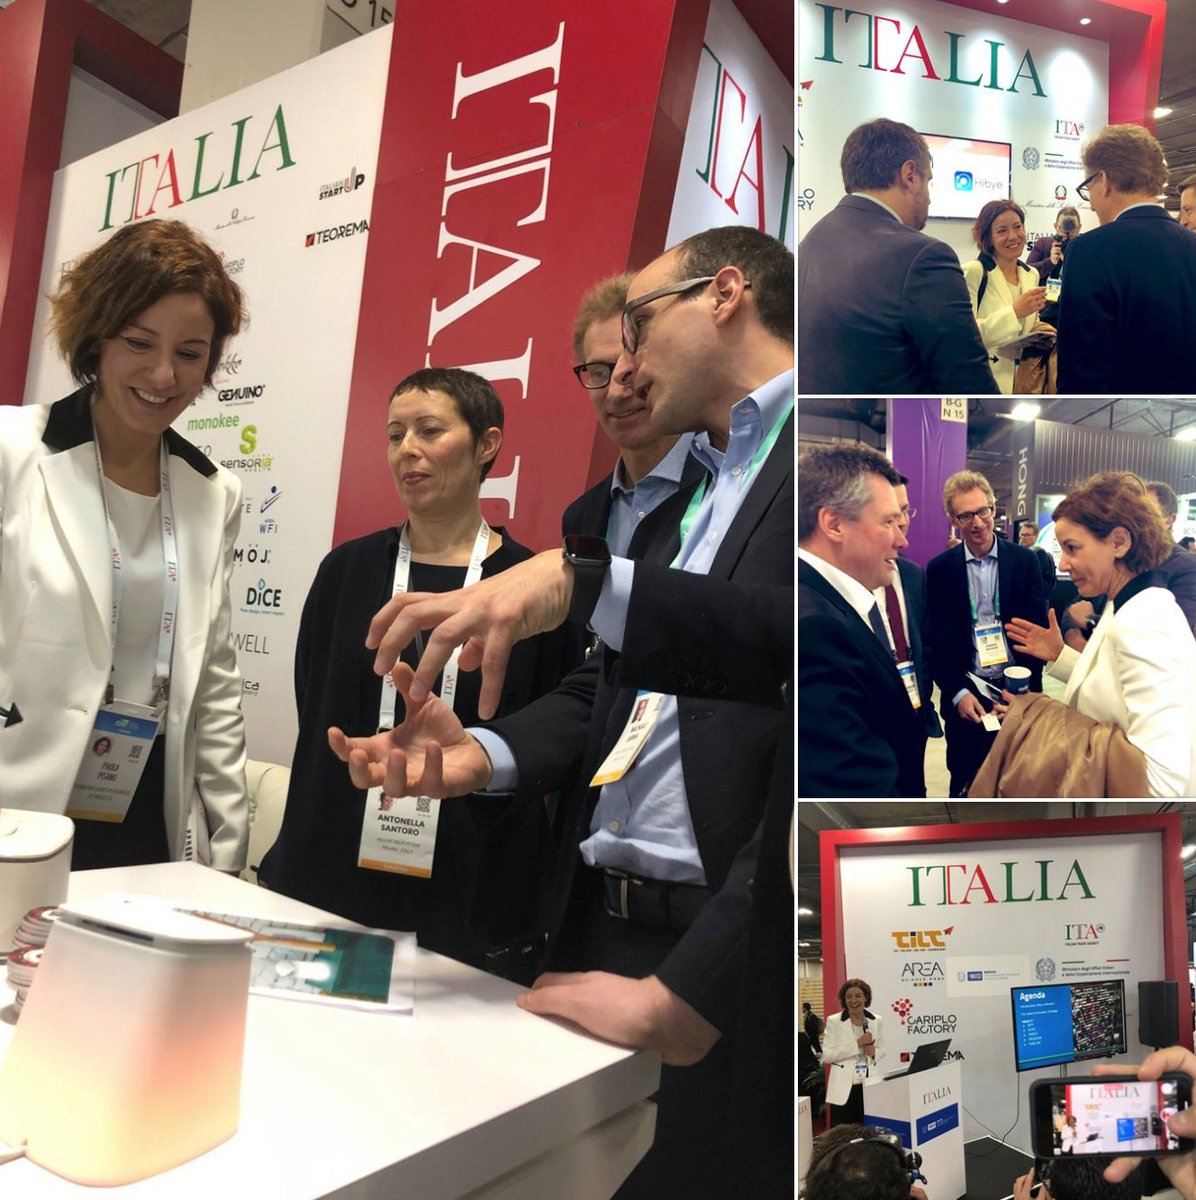 We are honored to be part of the project 'Jeniot Home | Air Safe' with #GeneraliJeniot, born from the iniziative of @CariploFactory and @GeneraliItalia, and to have received the visit of the Minister for the Innovation Technology & Digitalization,@PaolaPisano_Min.
#betterair4all